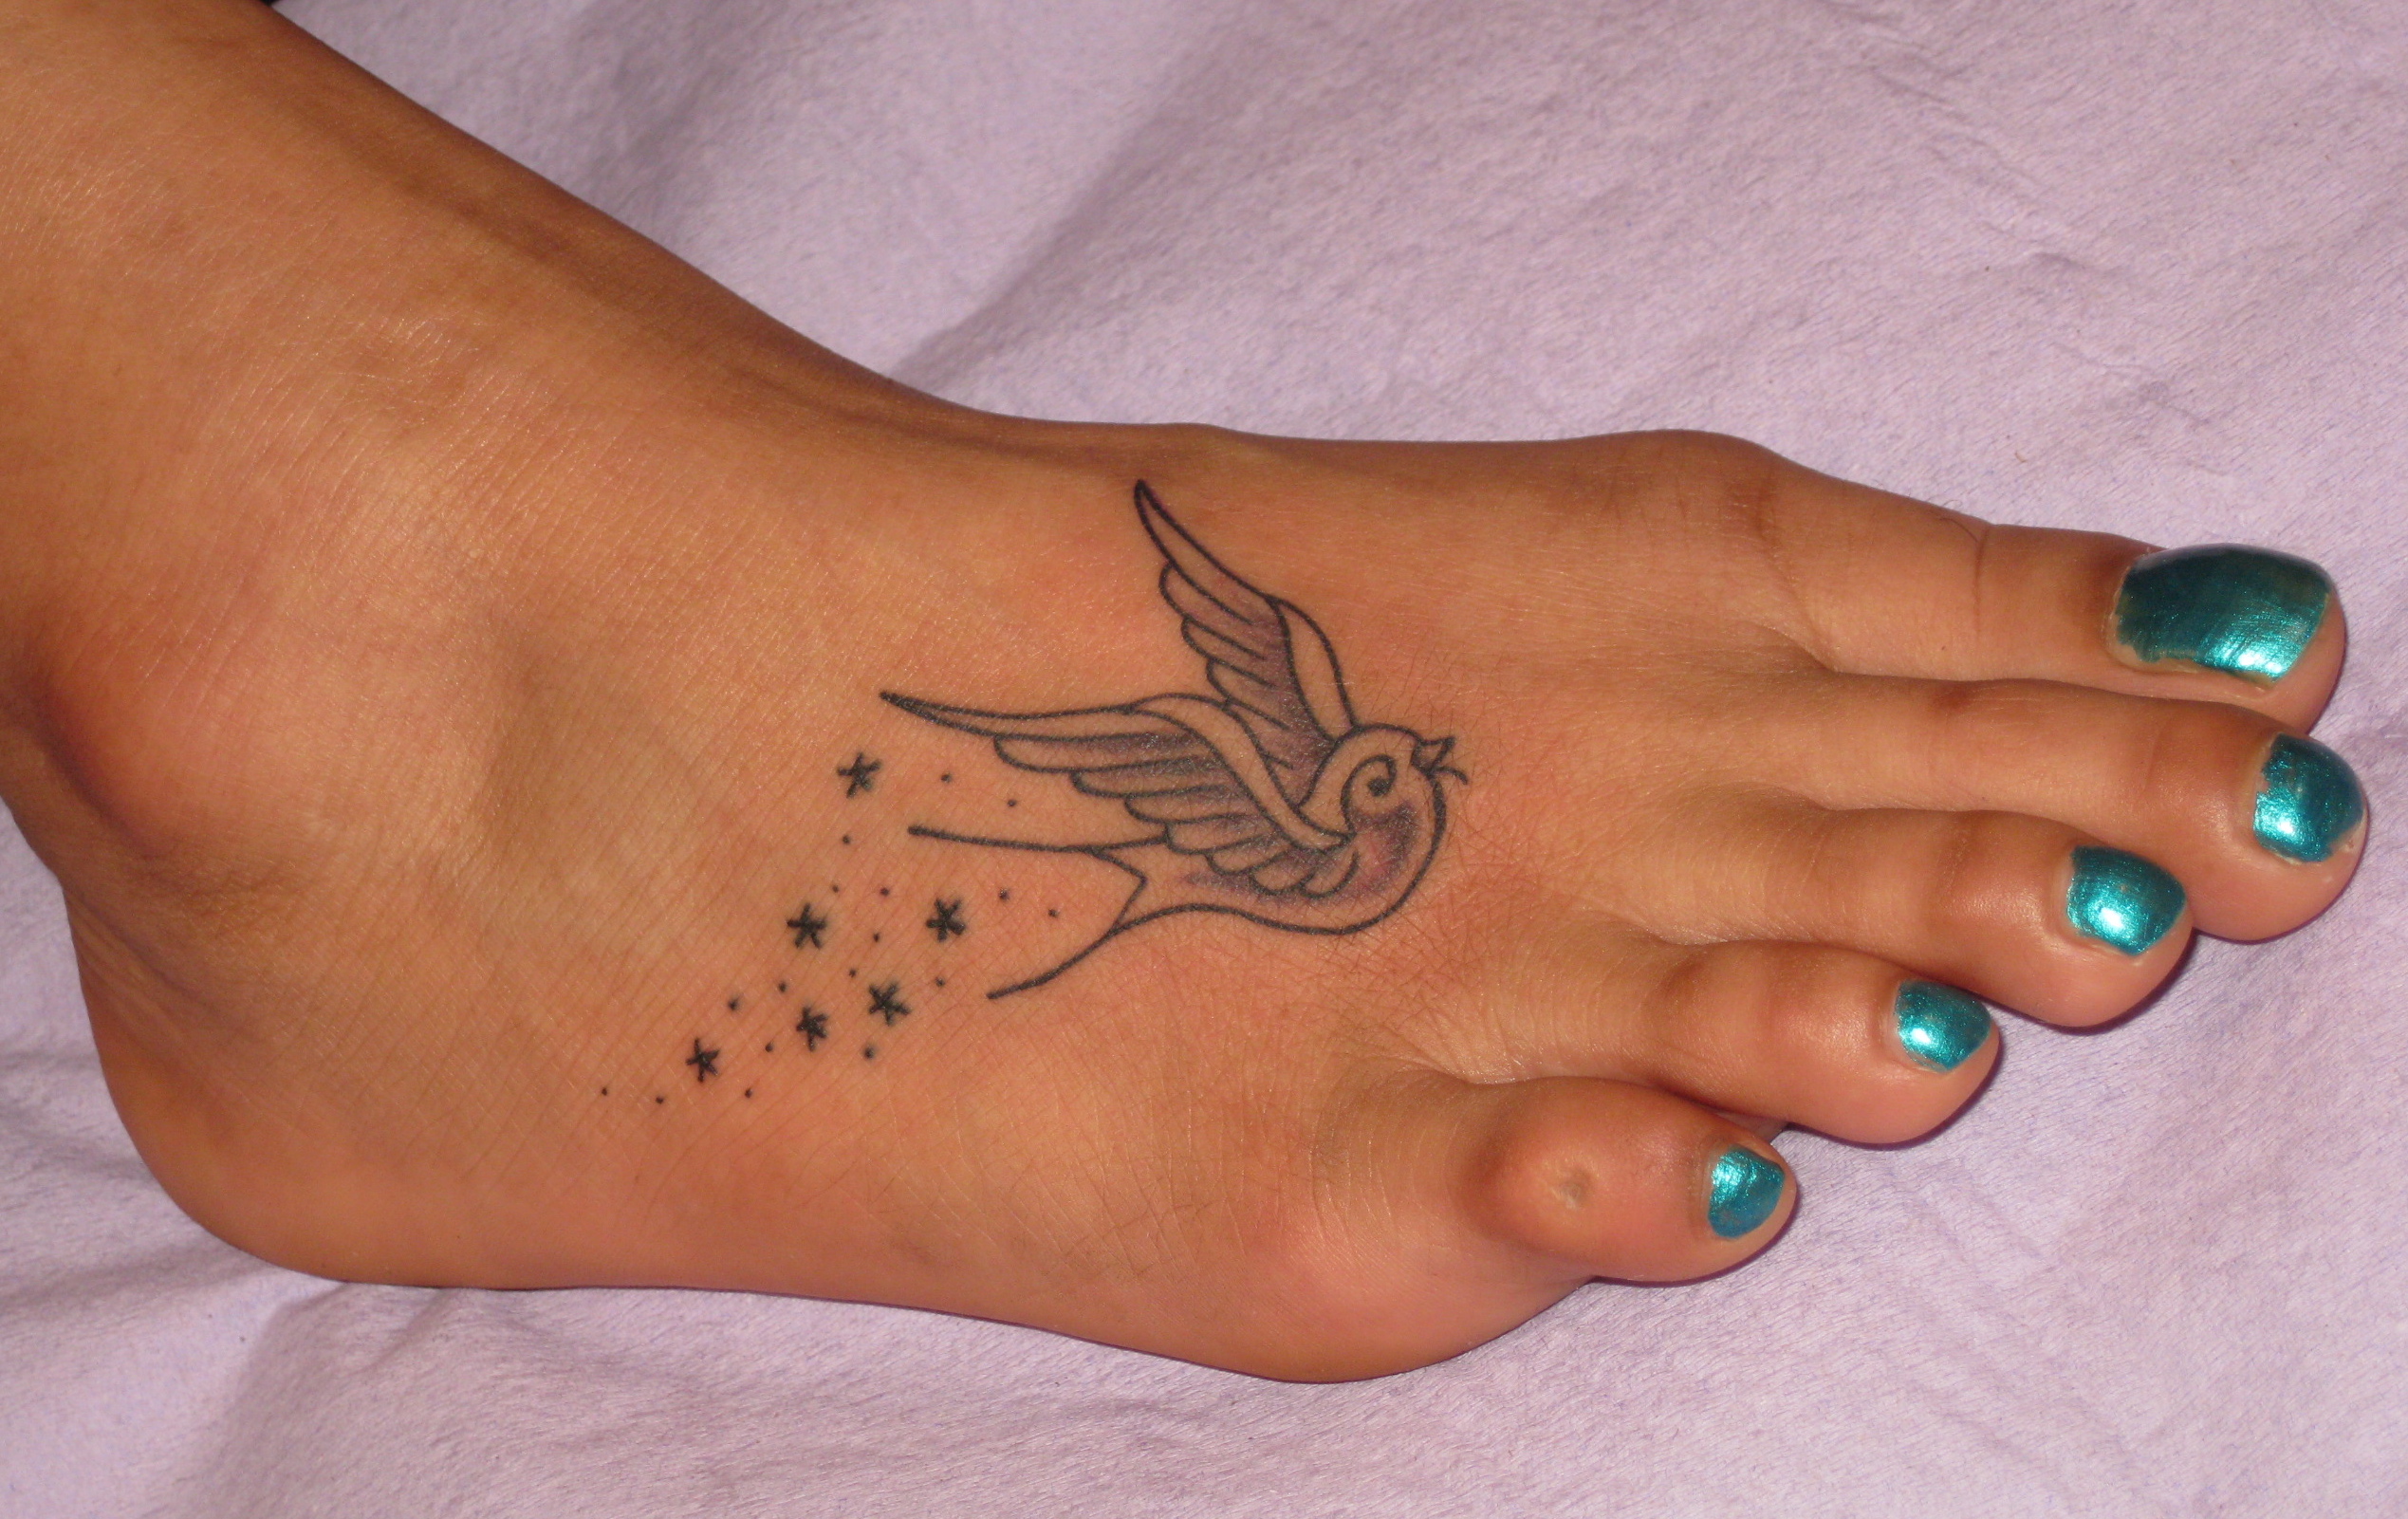 Swallow Tattoos Designs, Ideas and Meaning | Tattoos For You